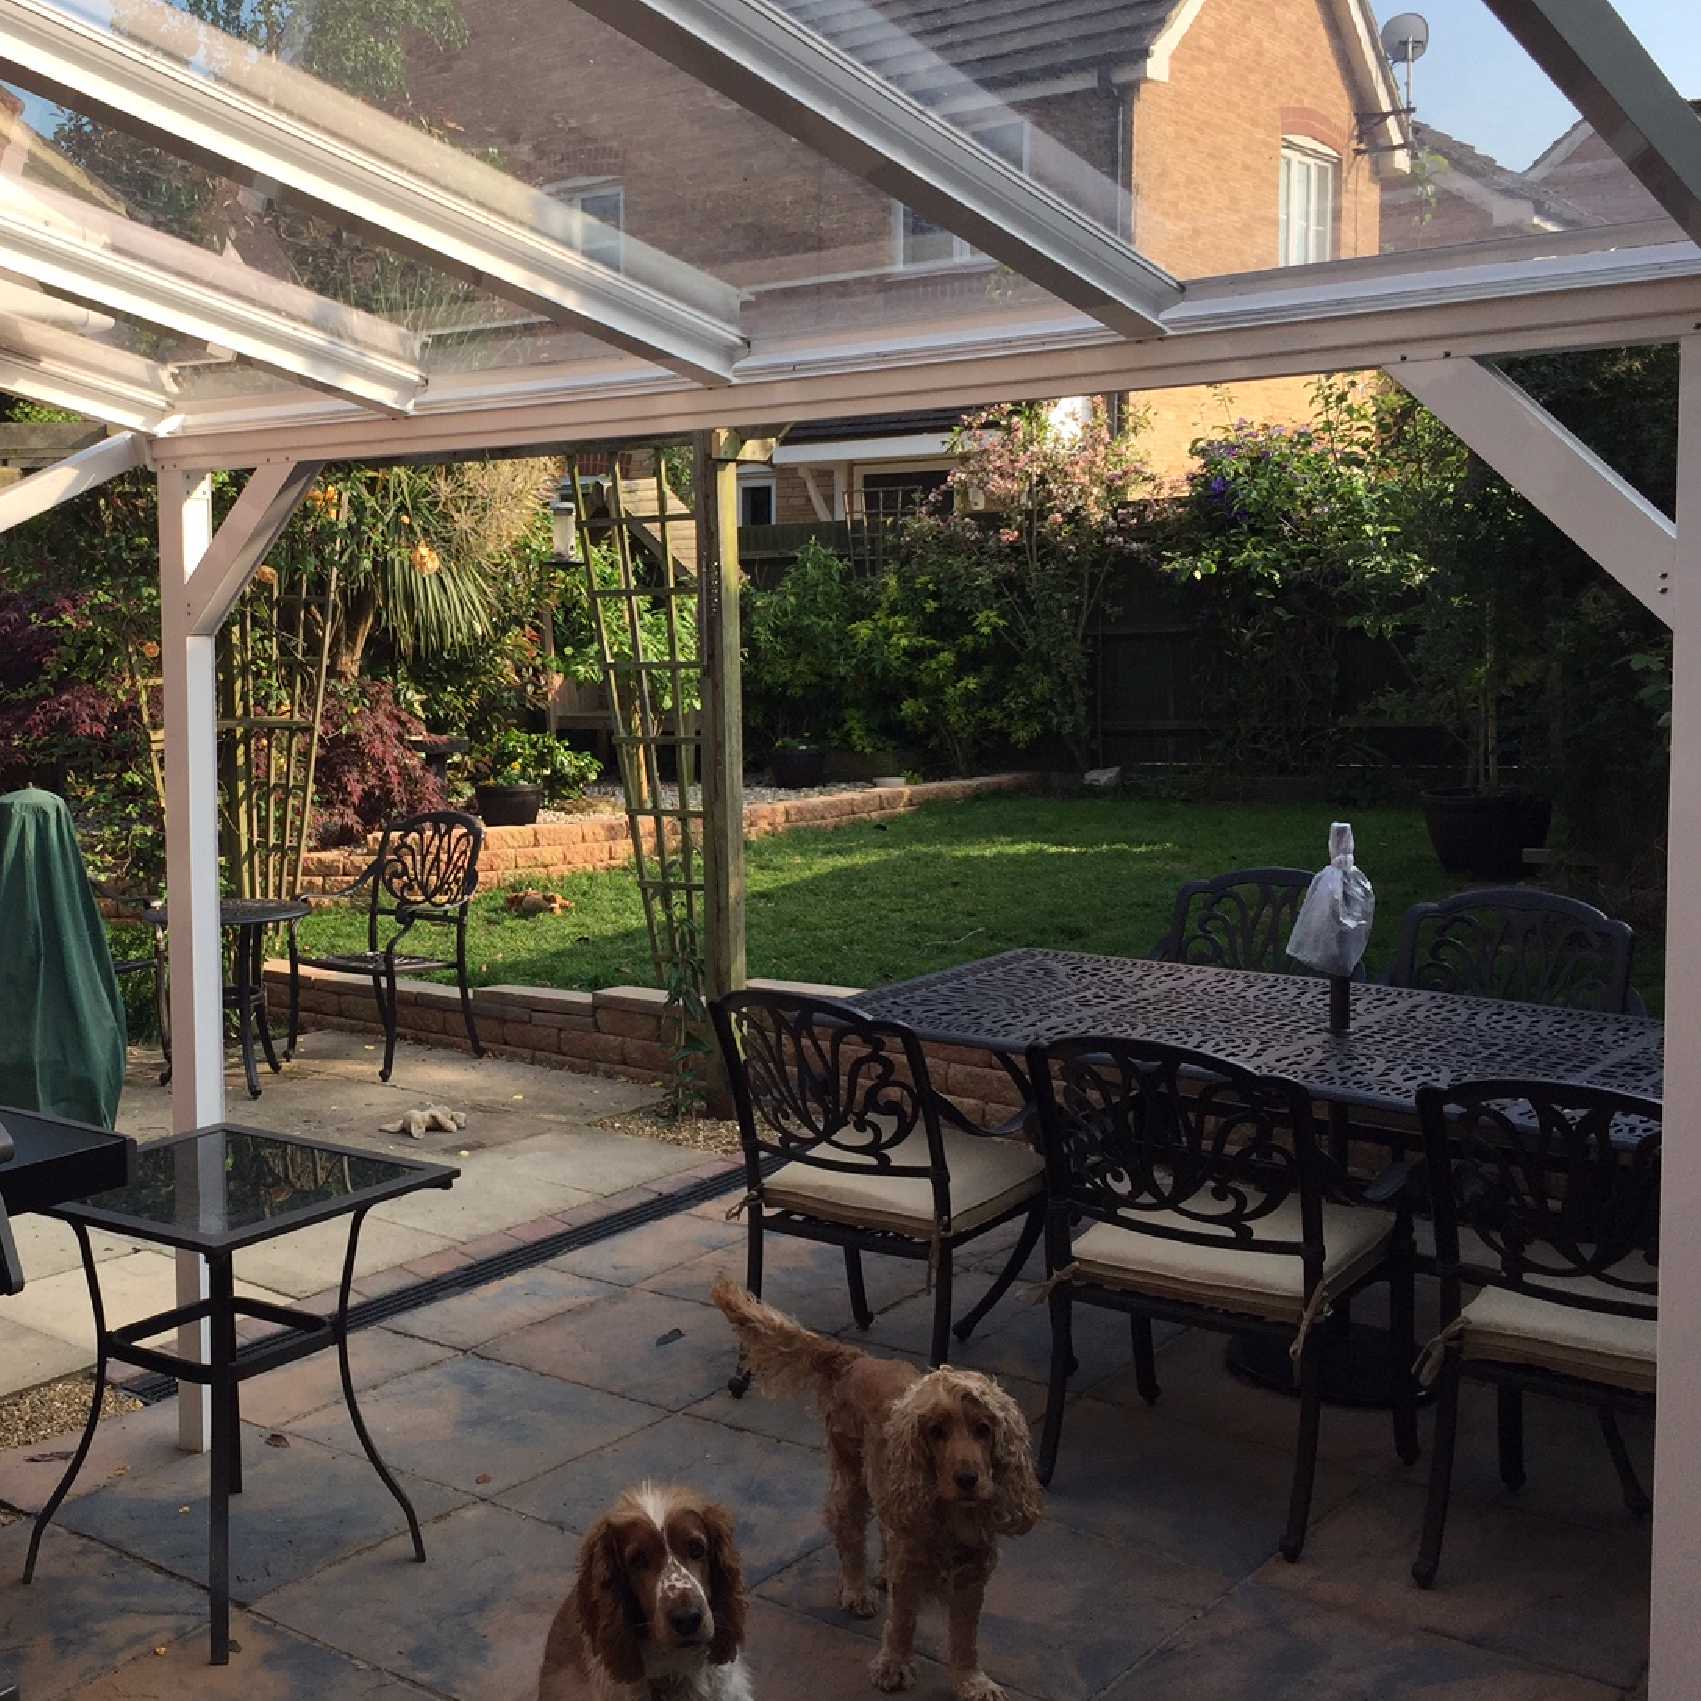 Affordable Omega Smart Lean-To Canopy, White UNGLAZED for 6mm Glazing - 3.5m (W) x 1.5m (P), (3) Supporting Posts